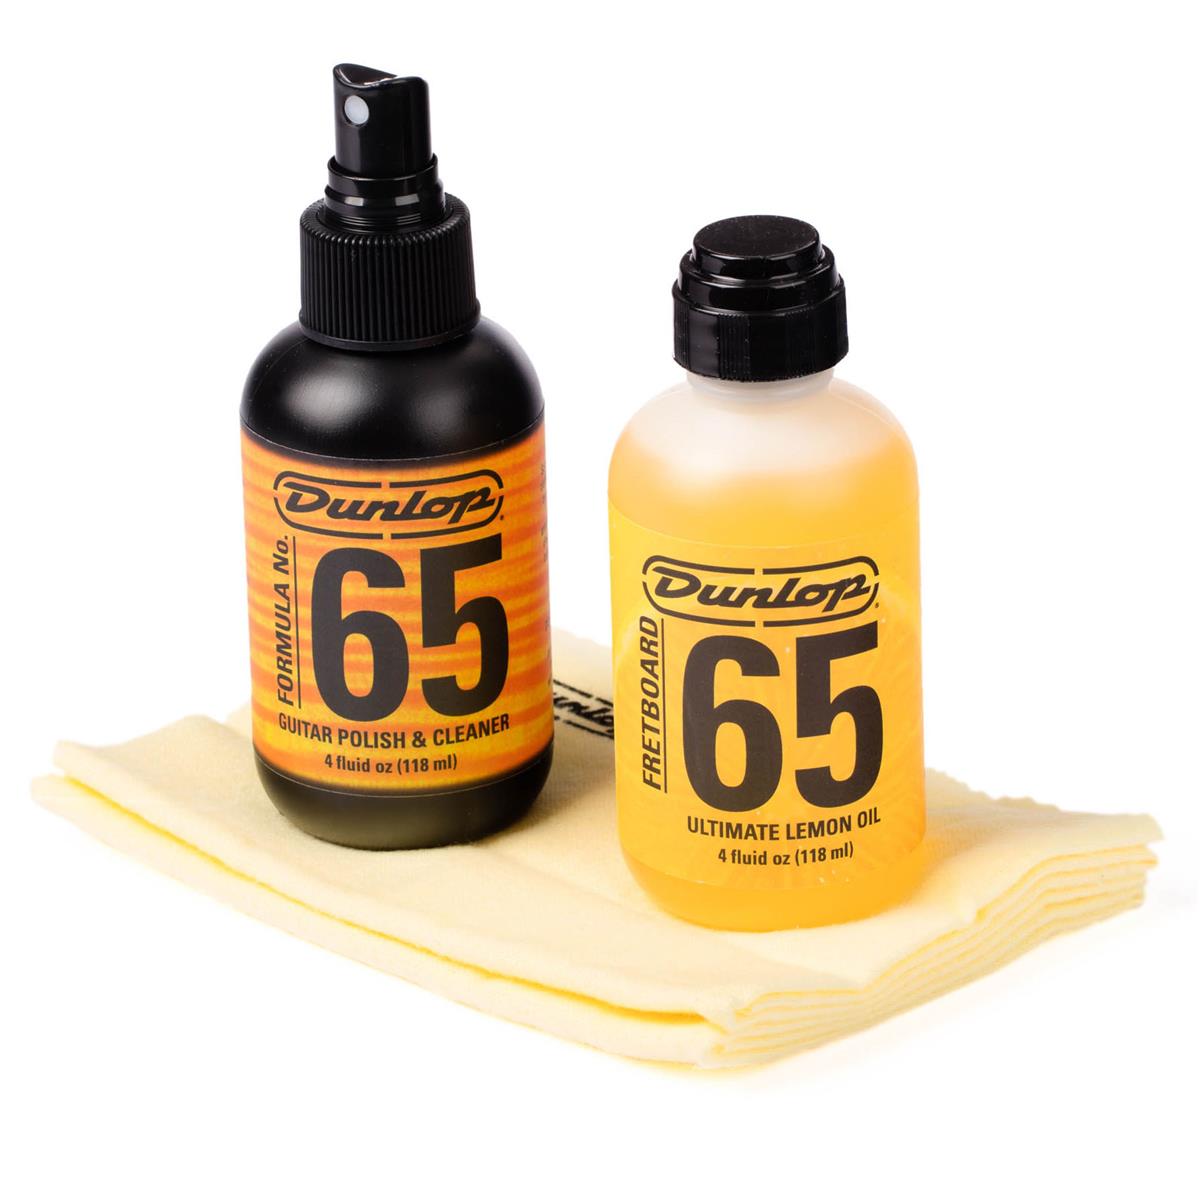 Image of Dunlop System 65 Body and Fingerboard Cleaning Kit